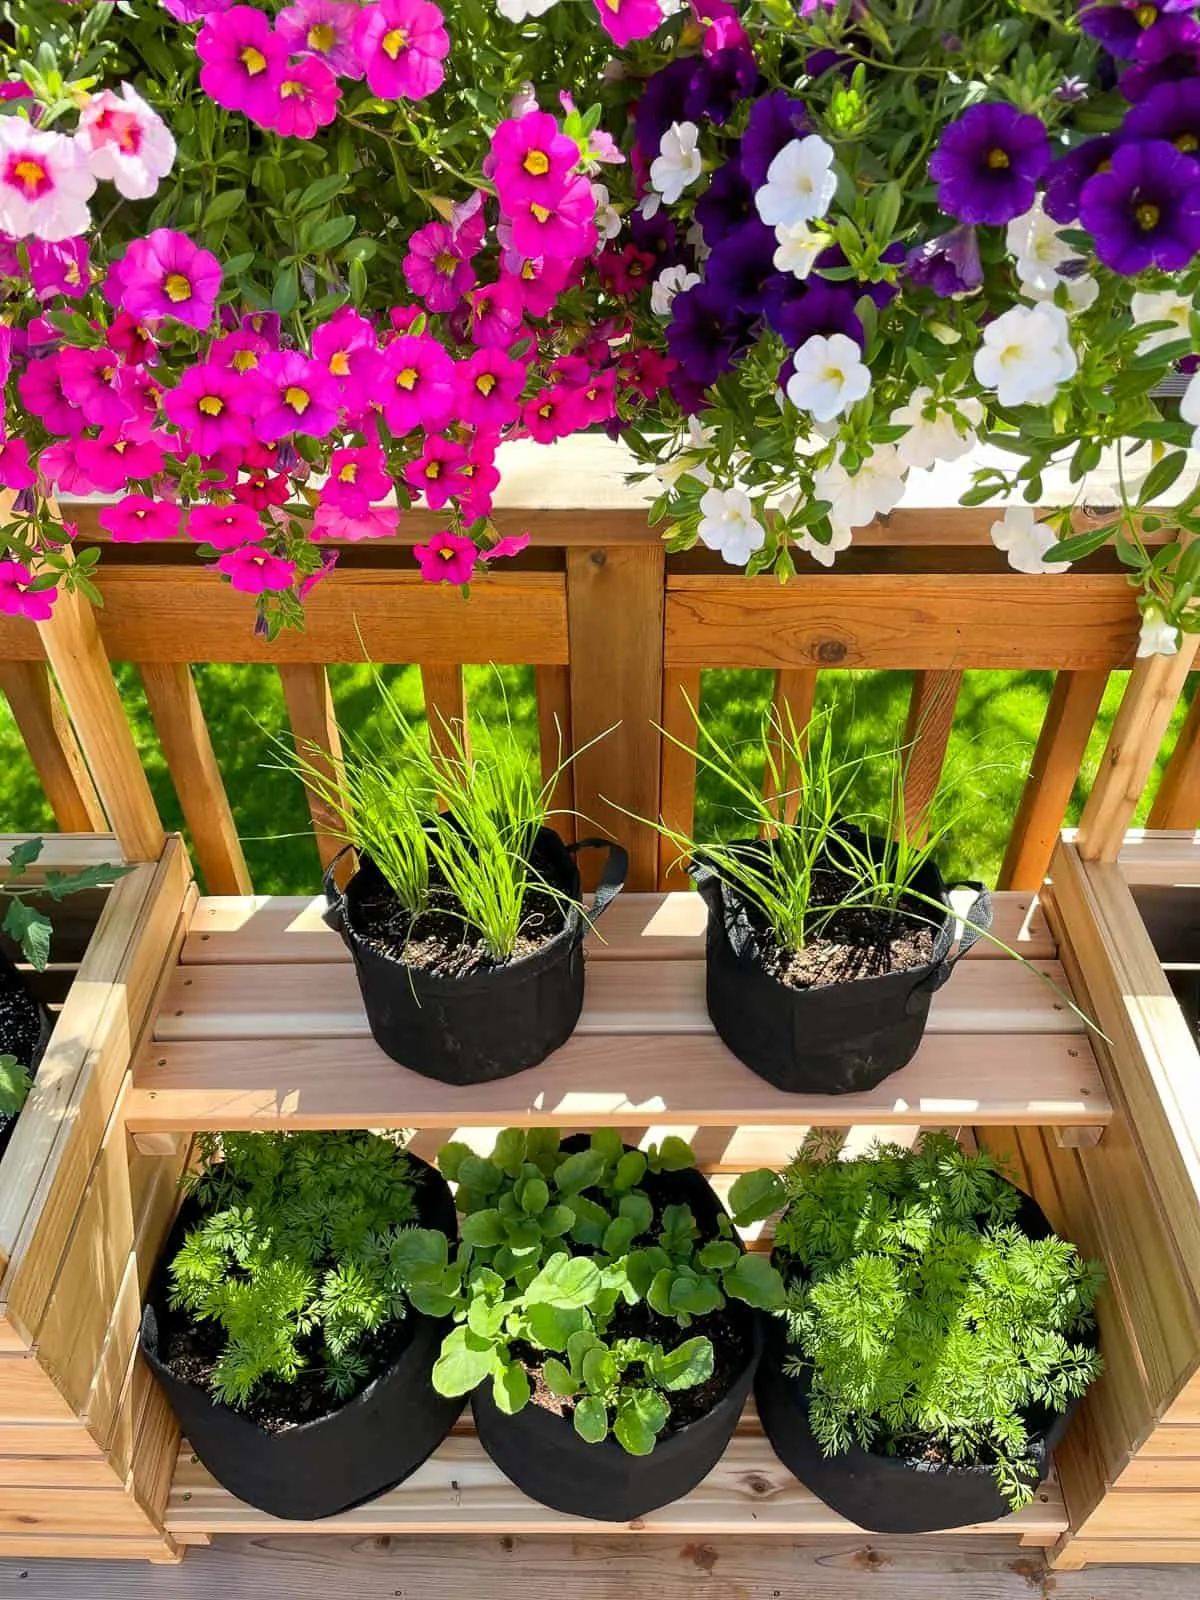 vegetable garden on shelves with hanging baskets above